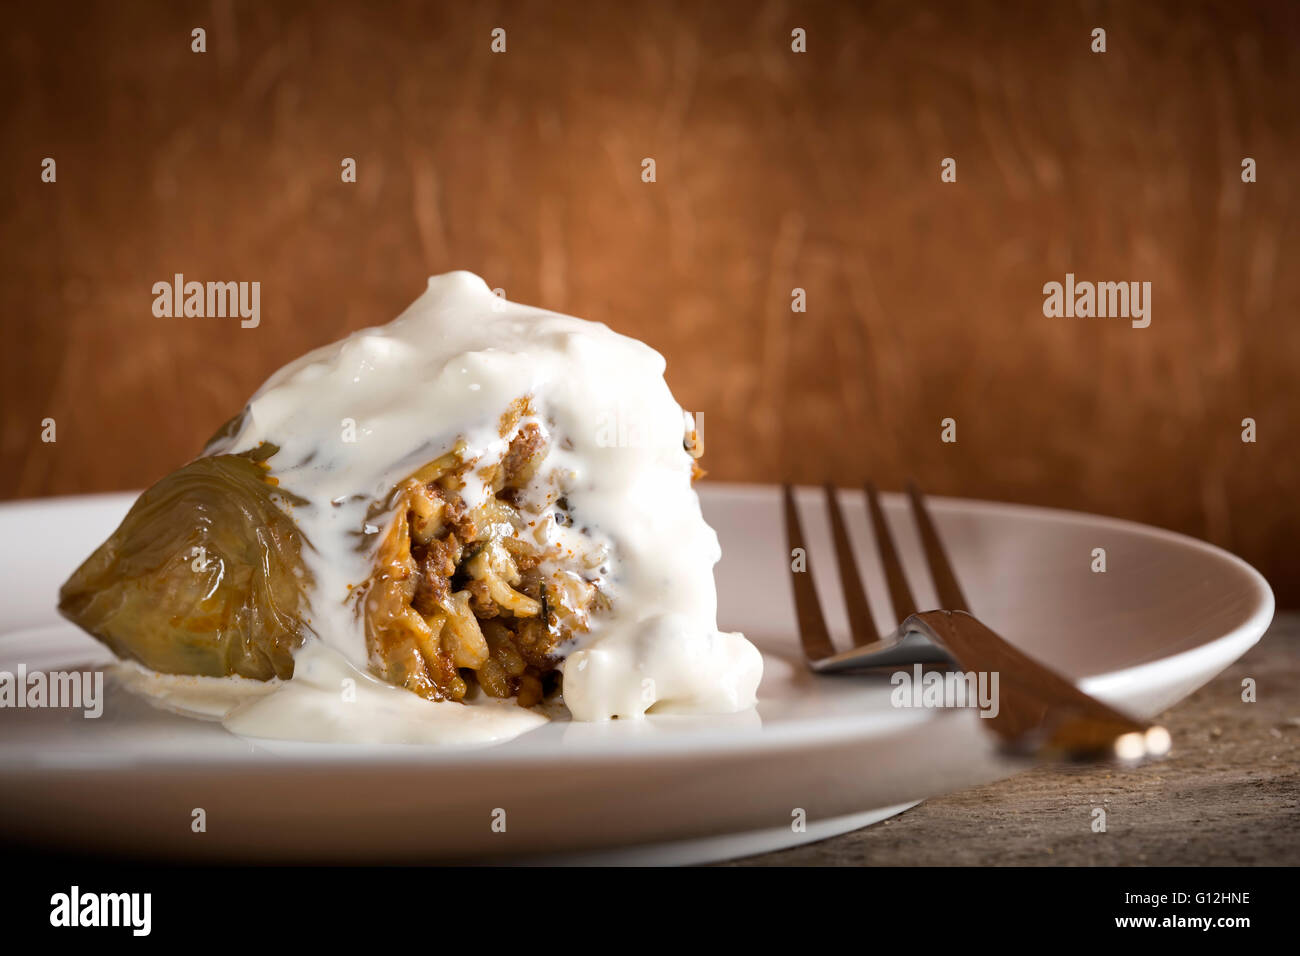 Pepper stuffed with meat and sour cream on white plate Stock Photo